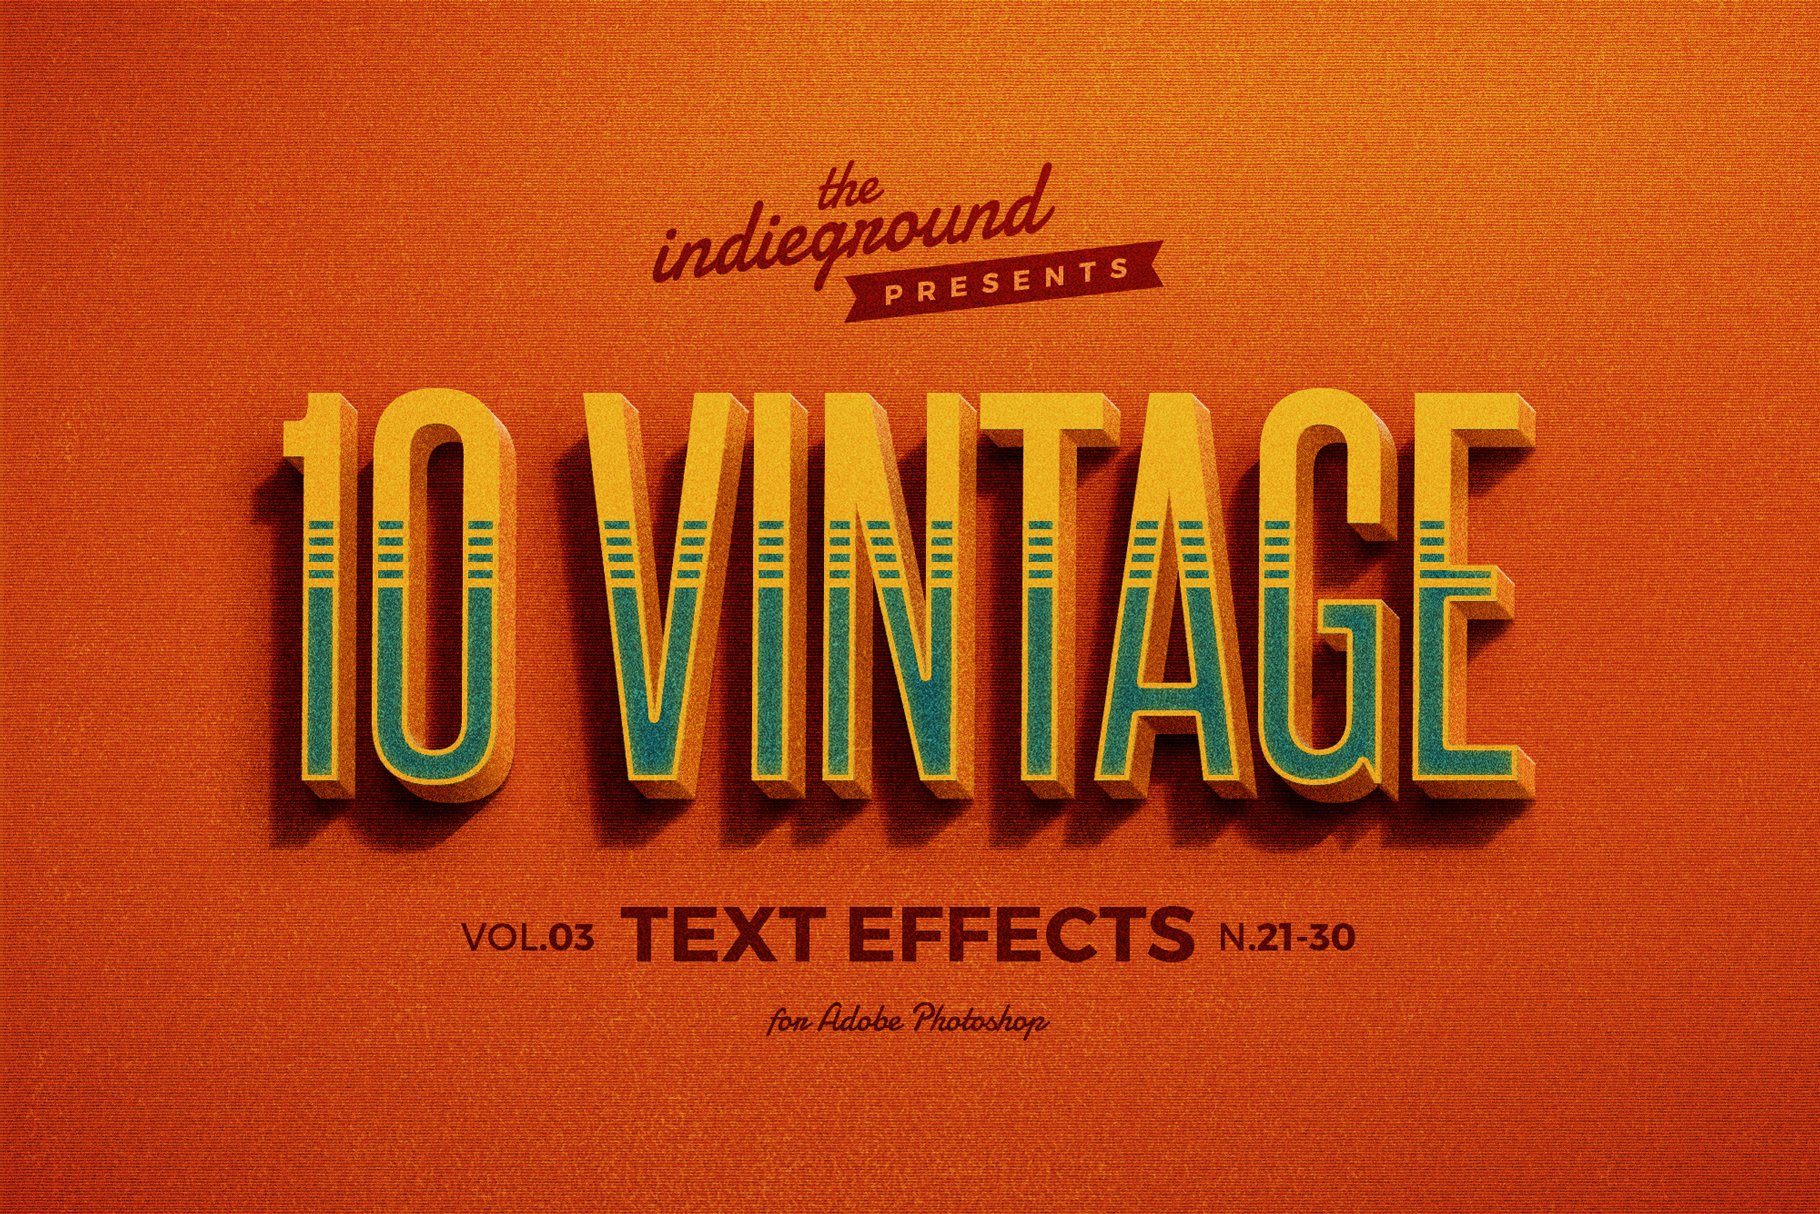 Retro Text Effects Vol.3cover image.